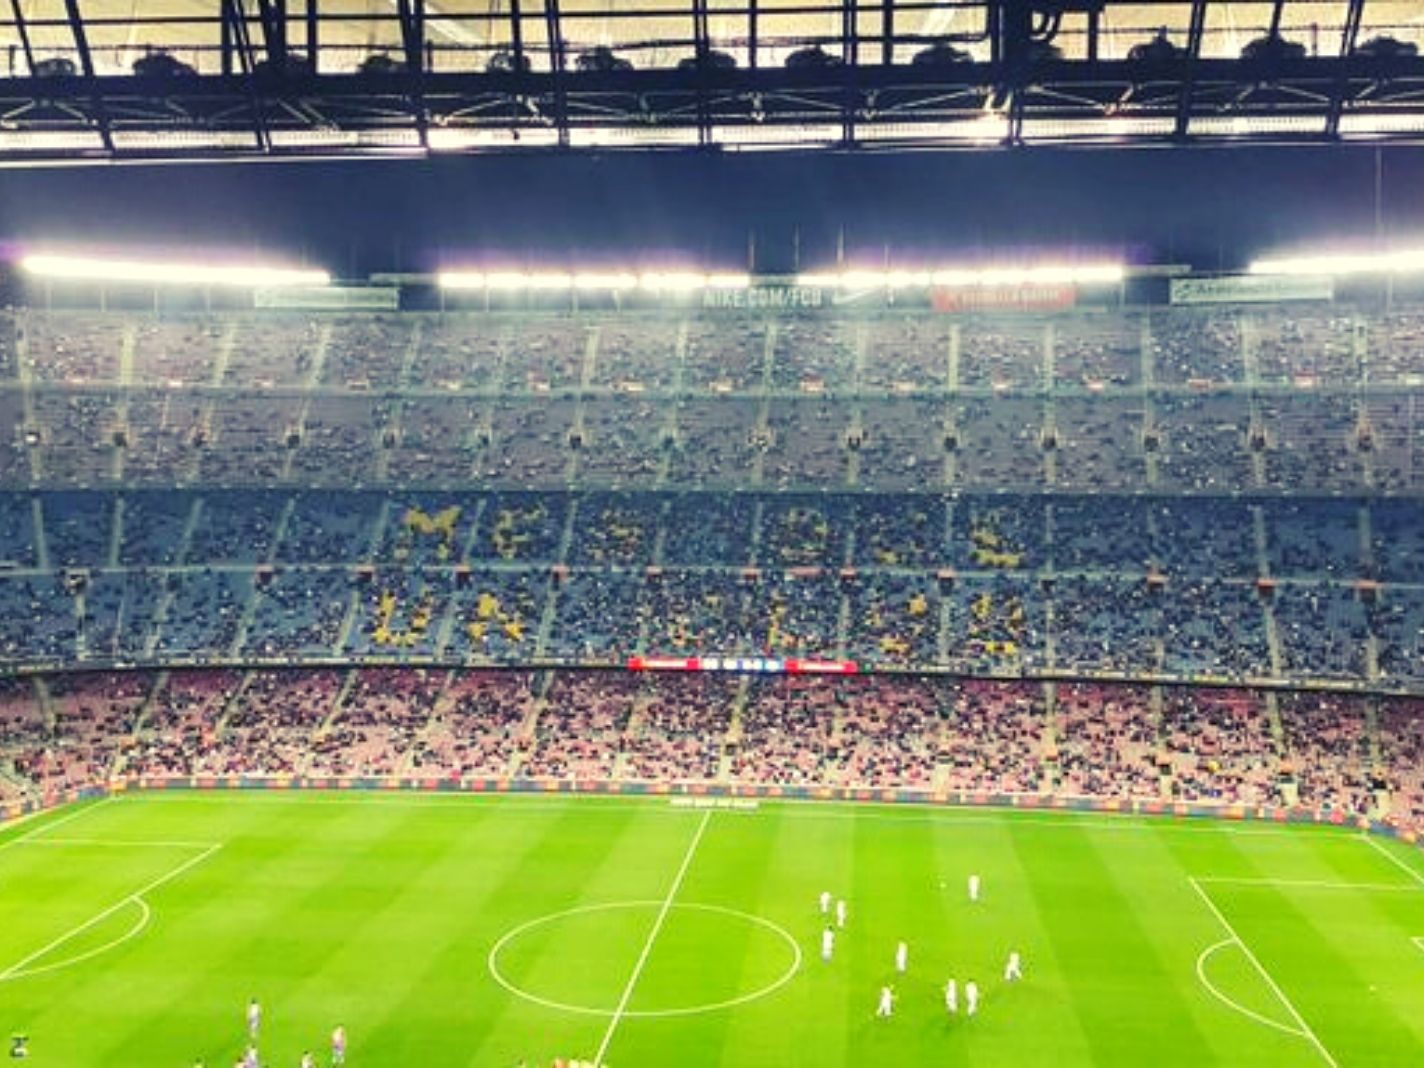 Camp Nou attendance for the game against Alaves was shockingly low